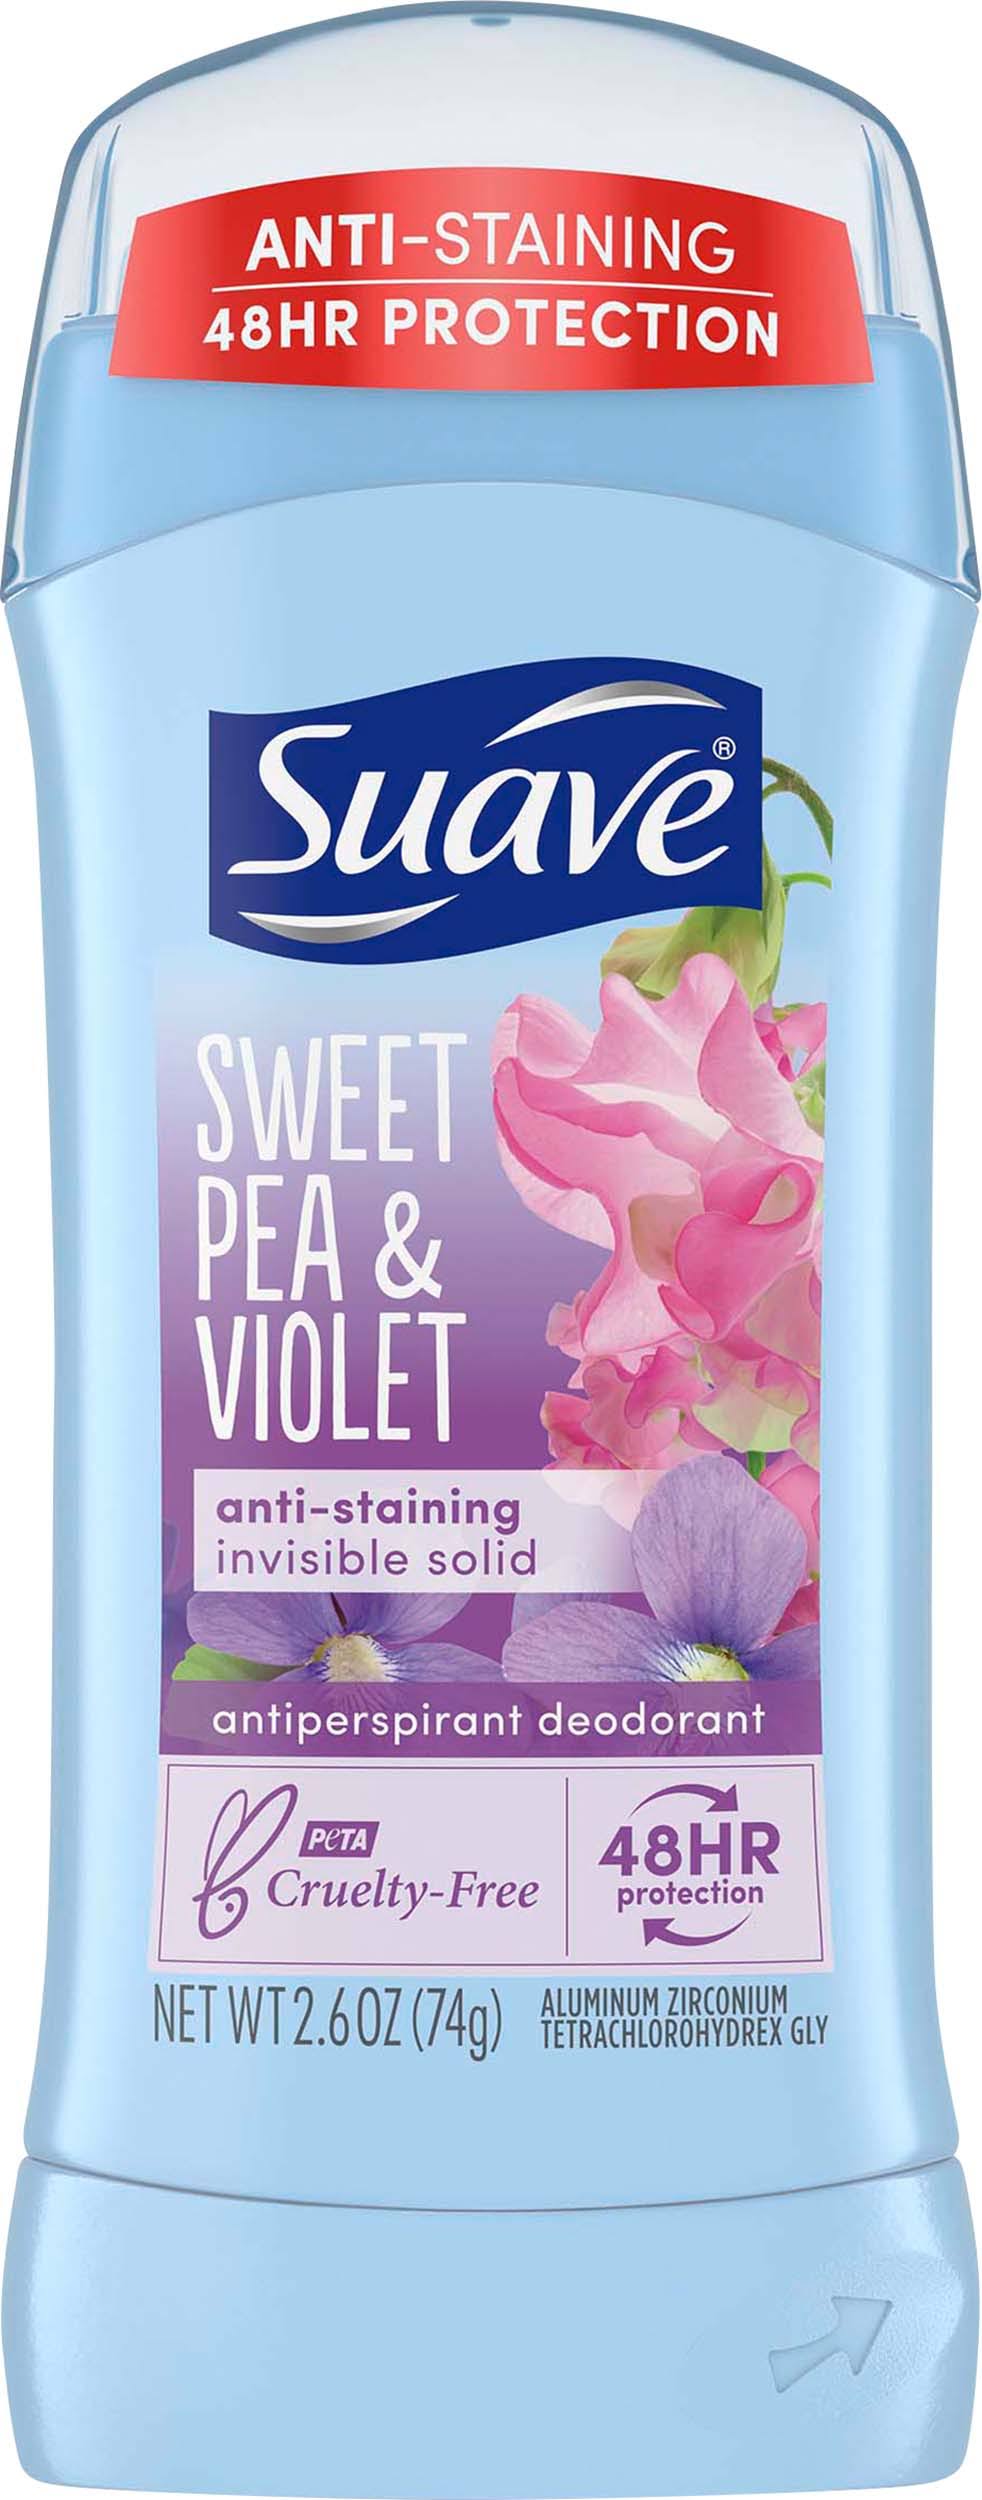 Suave Invisible Solid Anti Perspirant and Deodorant - Sweet Pea and Violet, 75g